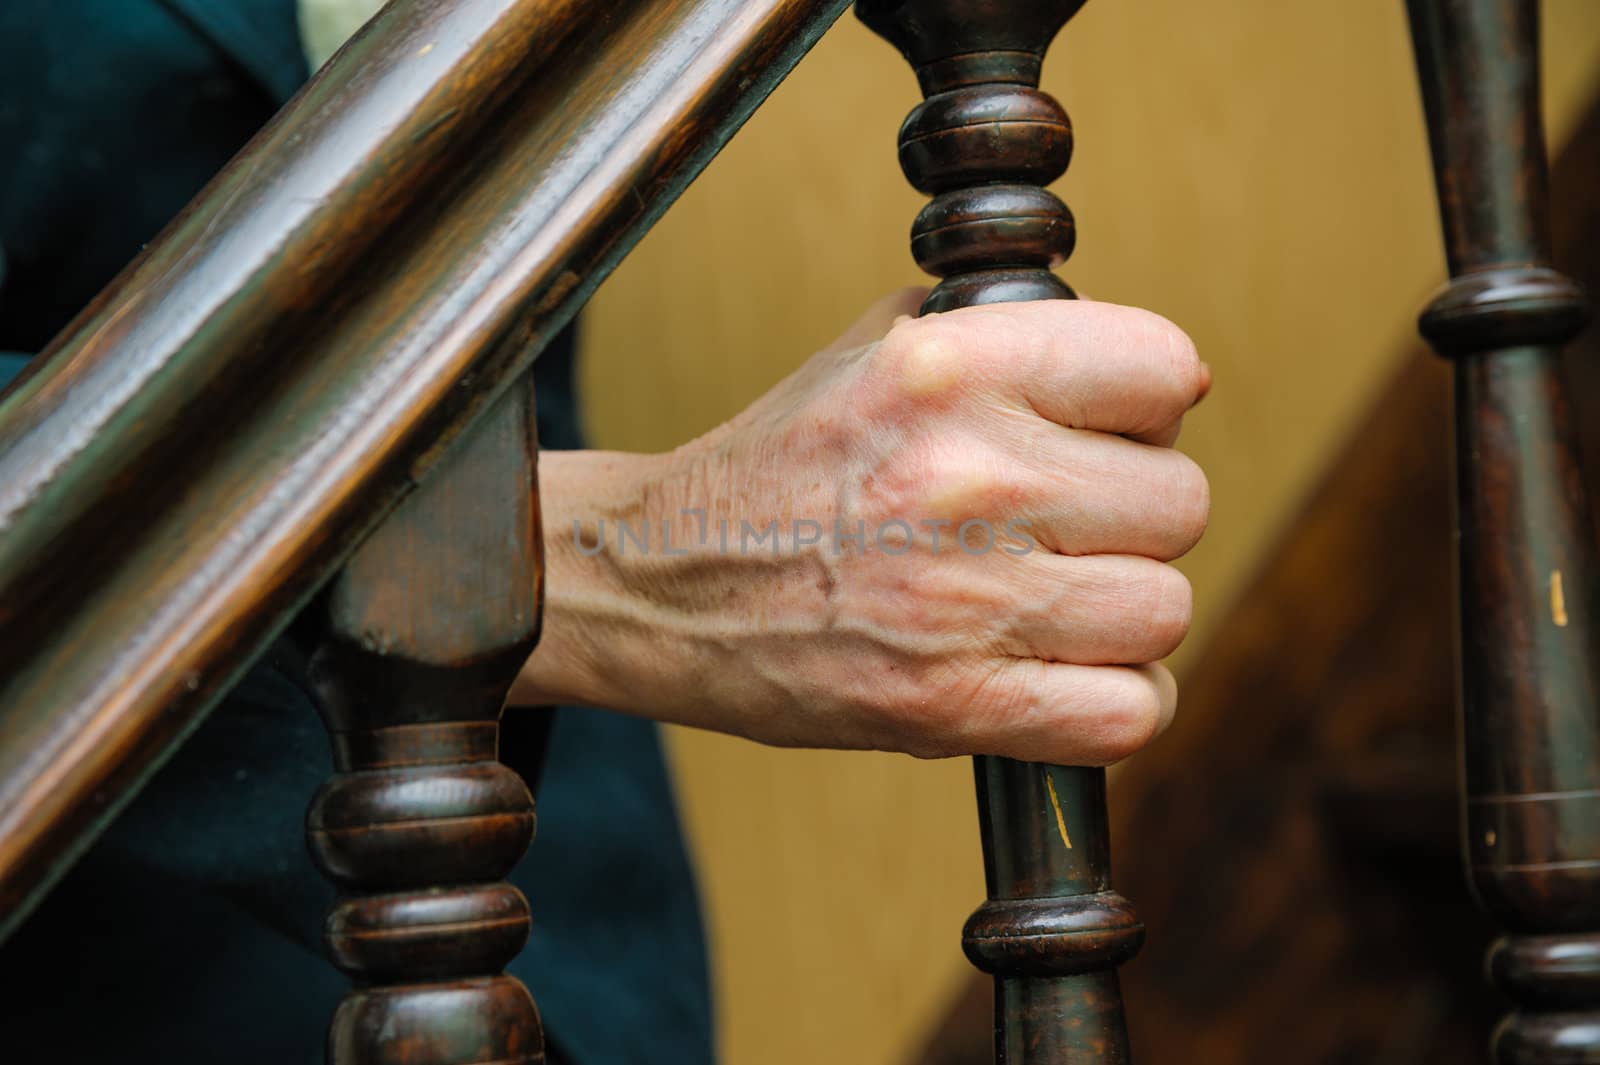 old woman wrinkled hands hold the handrail by docer2000